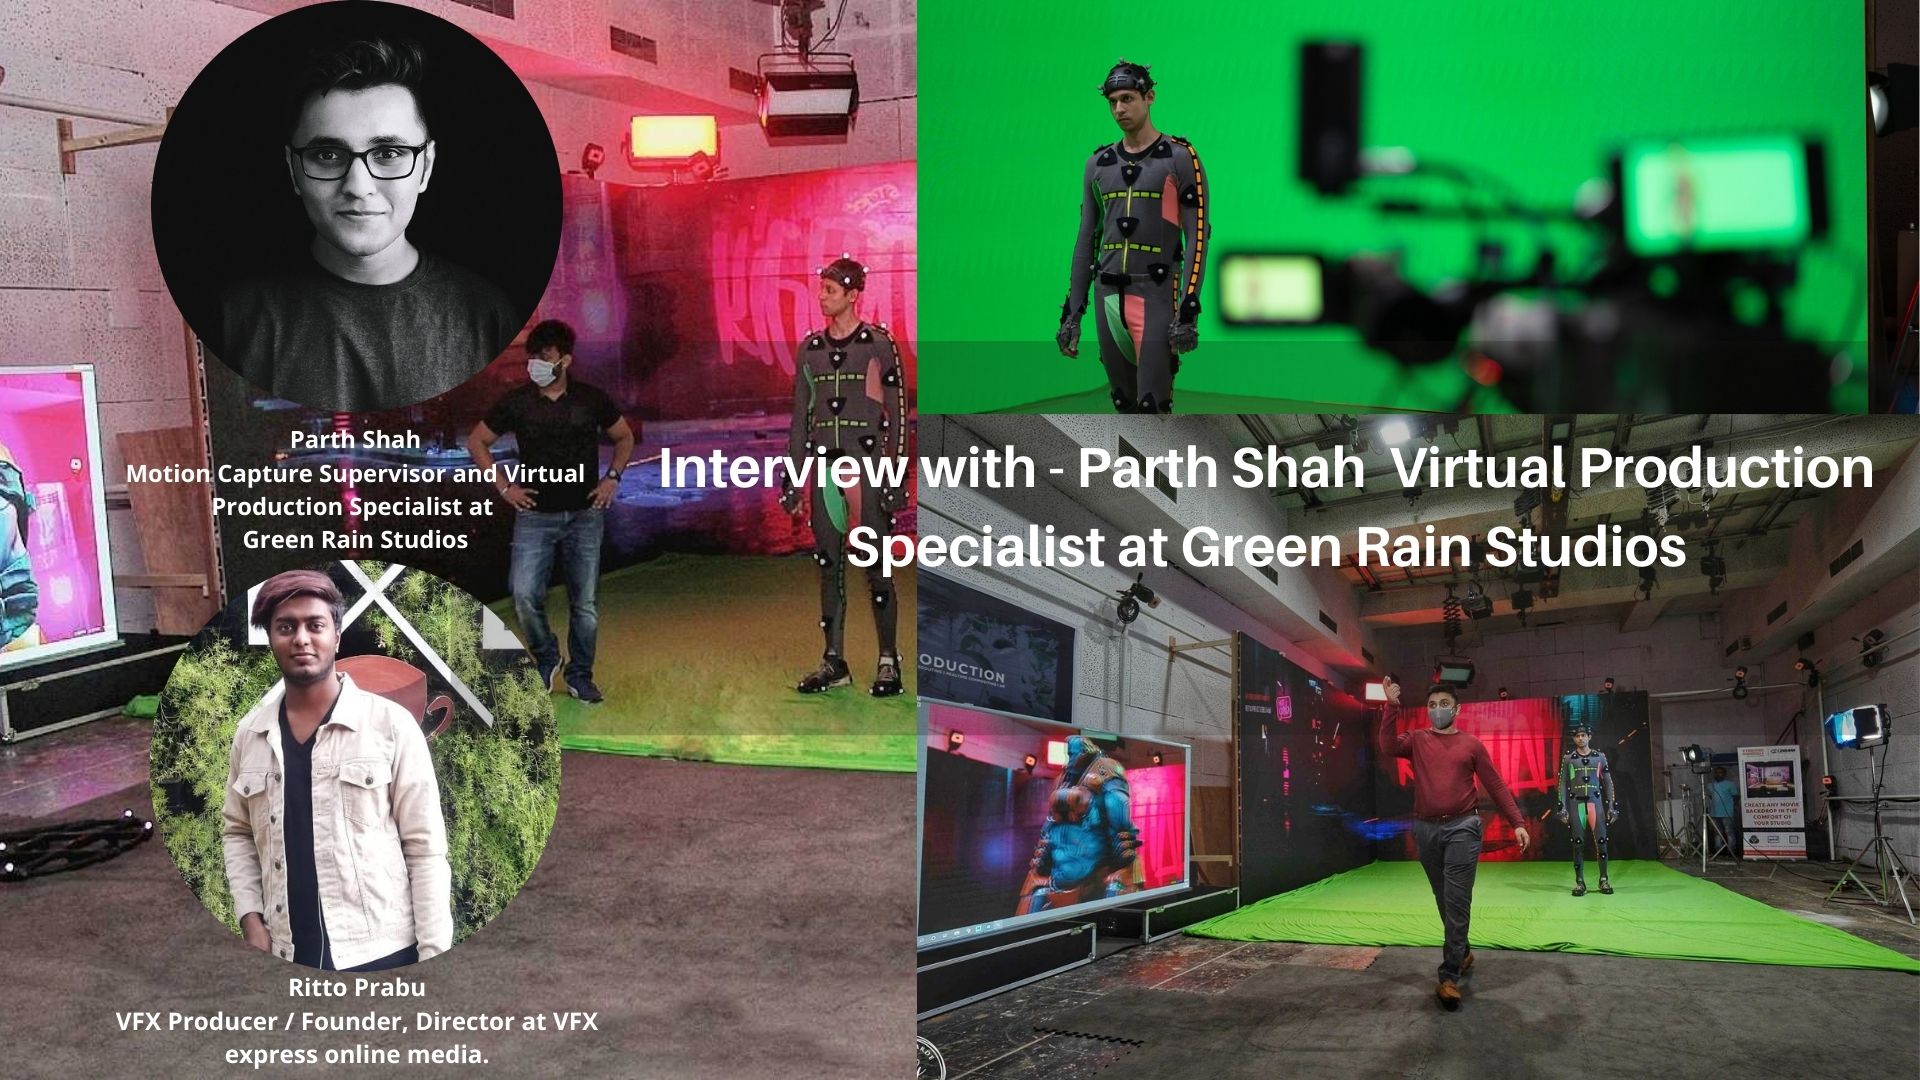 Interview with – Parth Shah  Motion Capture Supervisor and Virtual Production Specialist at Green Rain Studios